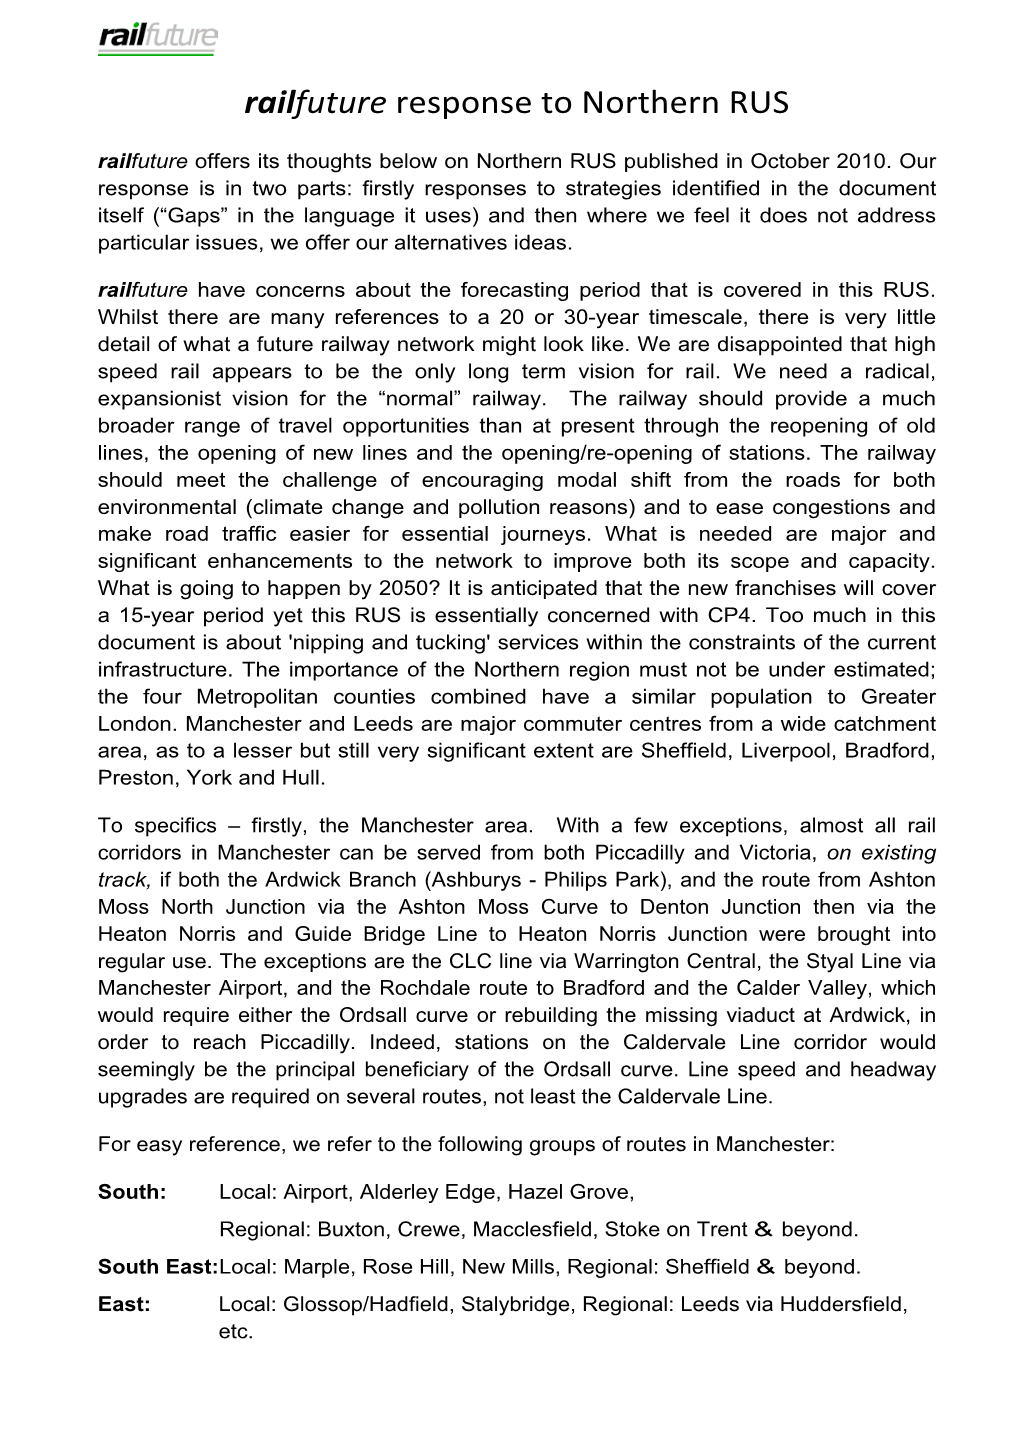 Railfuture Response to Northern RUS Railfuture Offers Its Thoughts Below on Northern RUS Published in October 2010